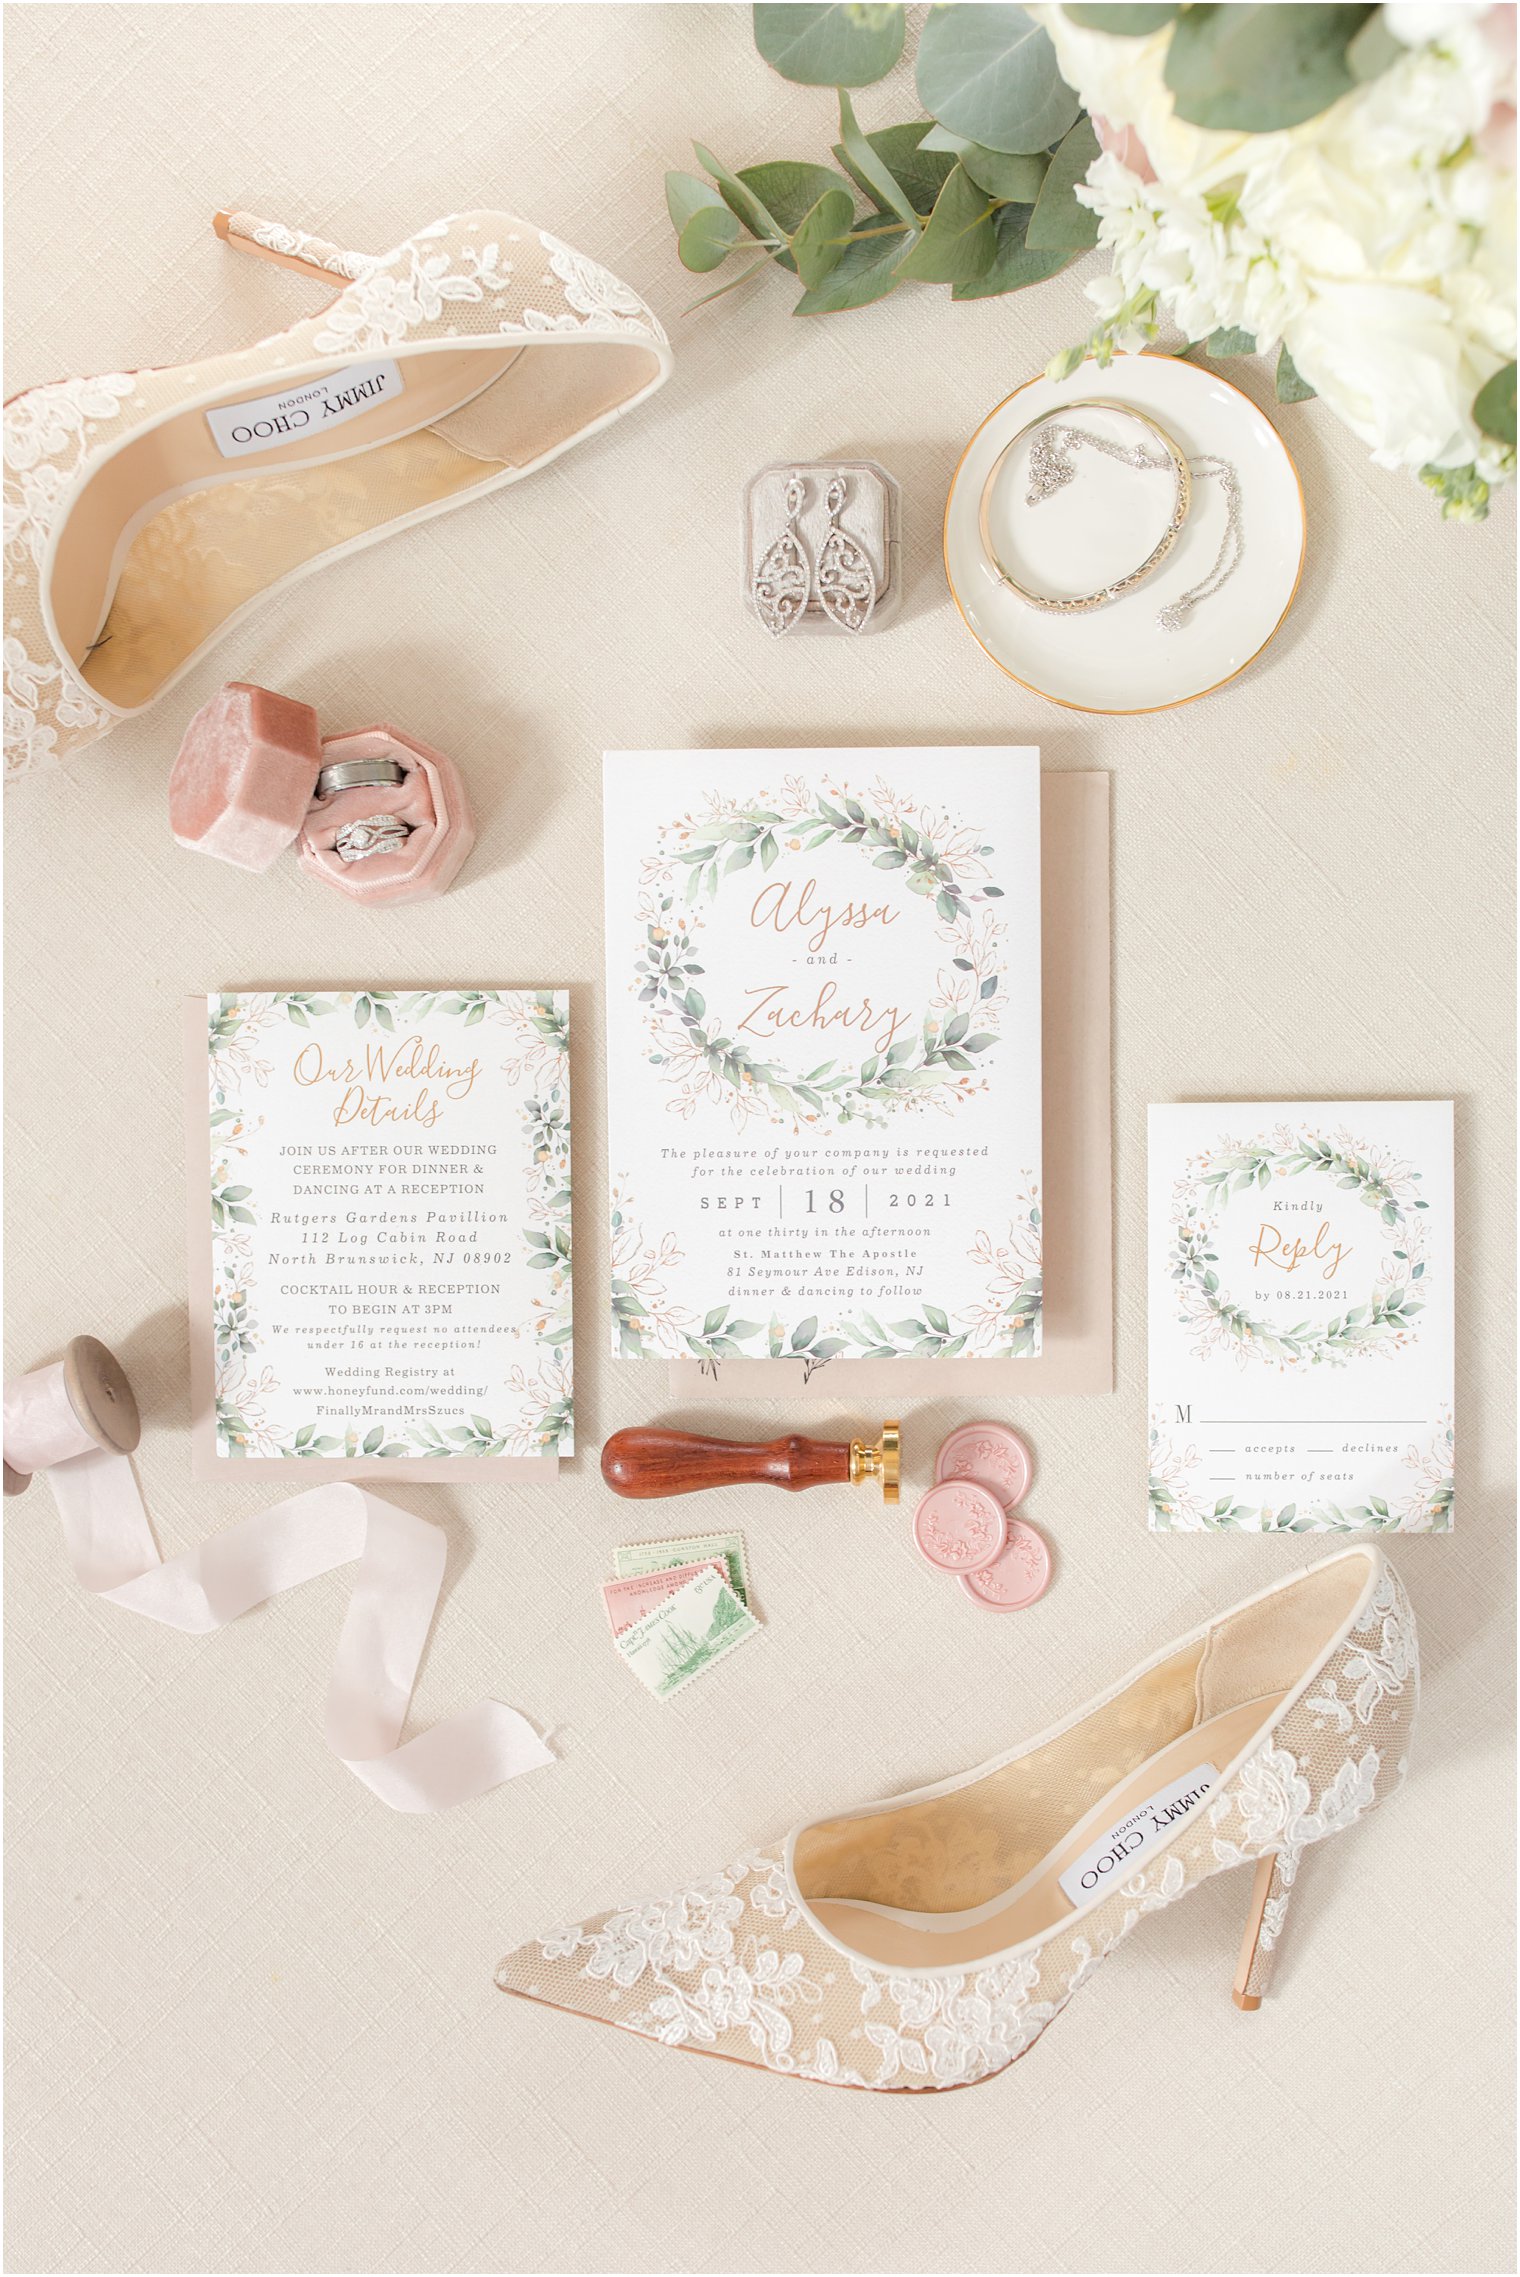 classic invitation suite with Jimmy Choo shoes for the bride 